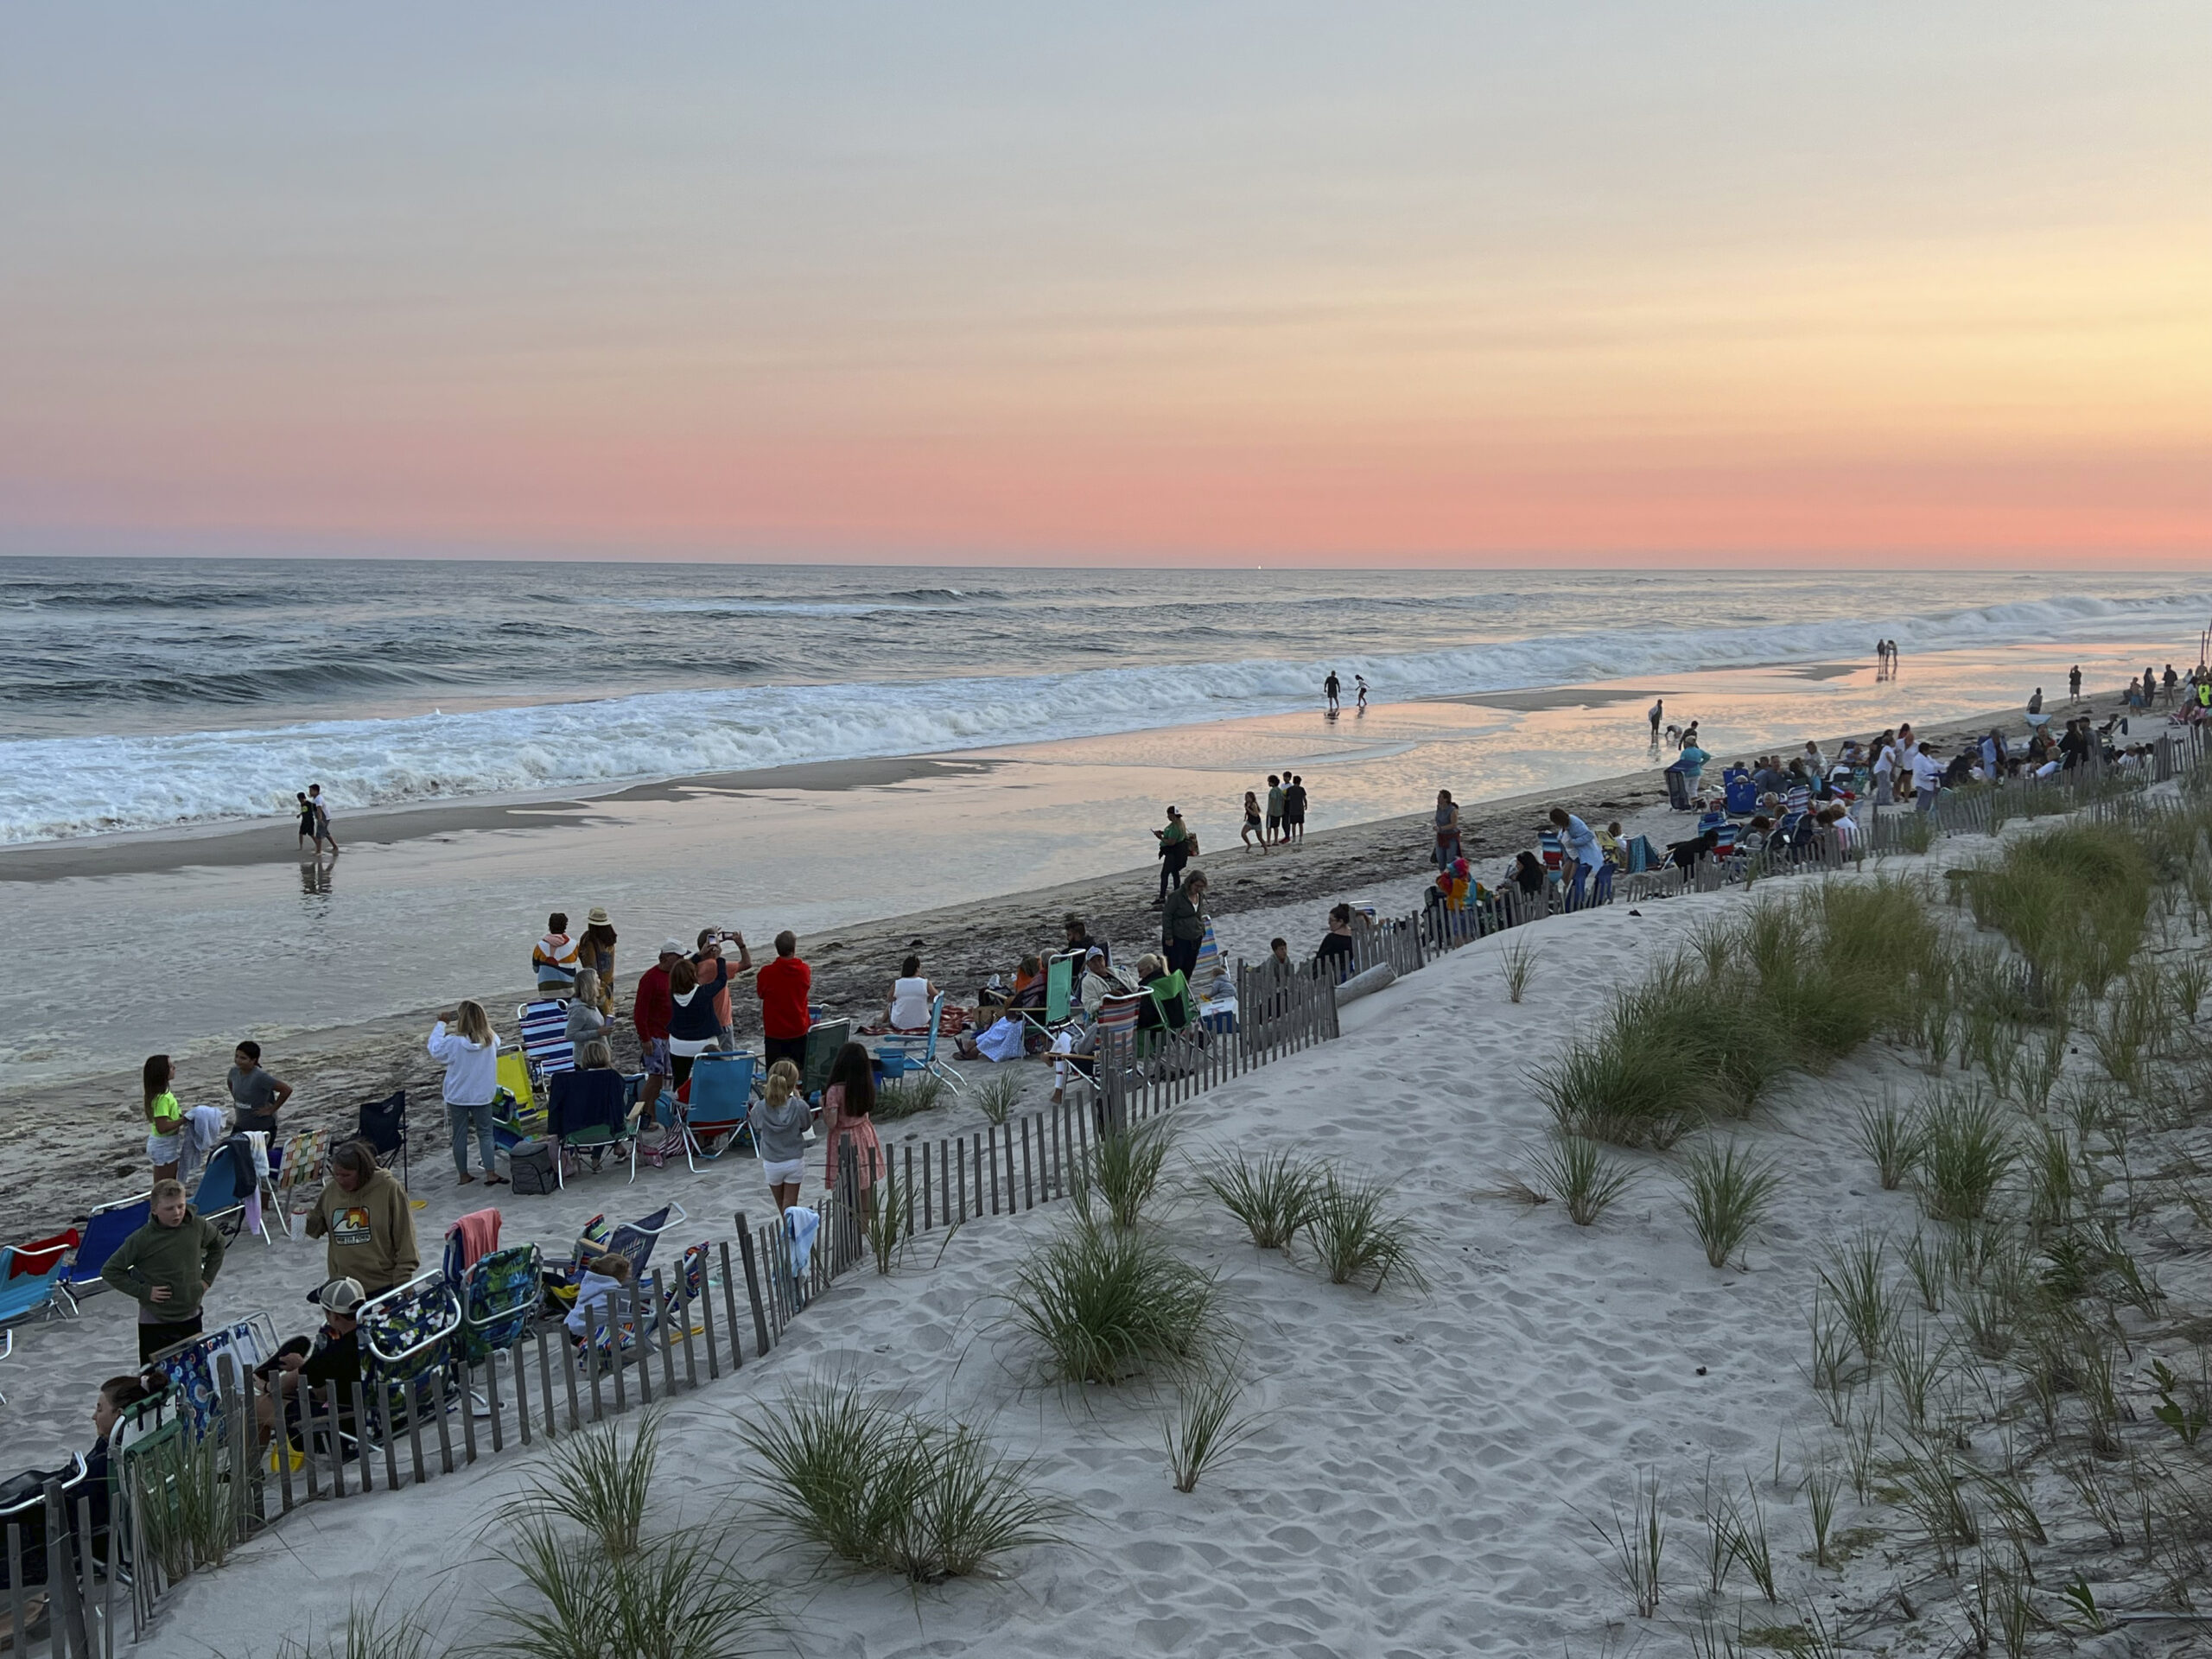 Folks gather on the beach to watch the fireworks.